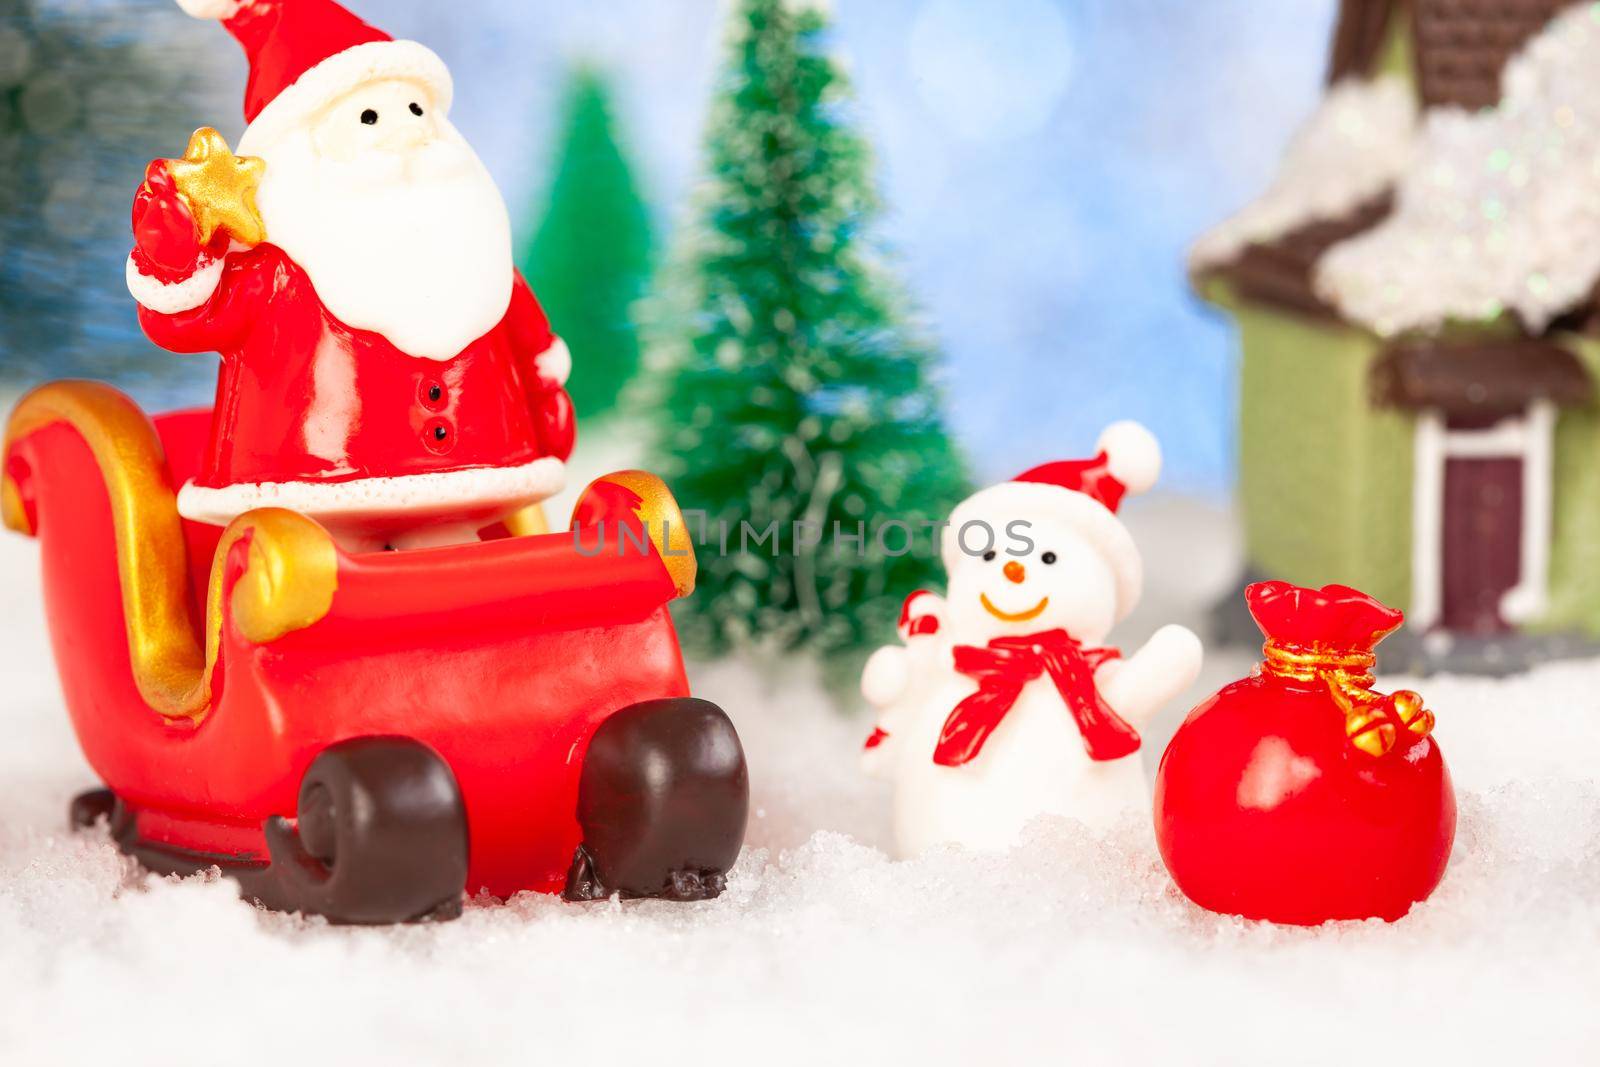 merry christmas greeting card, santa claus and sleigh in the snow, toys.